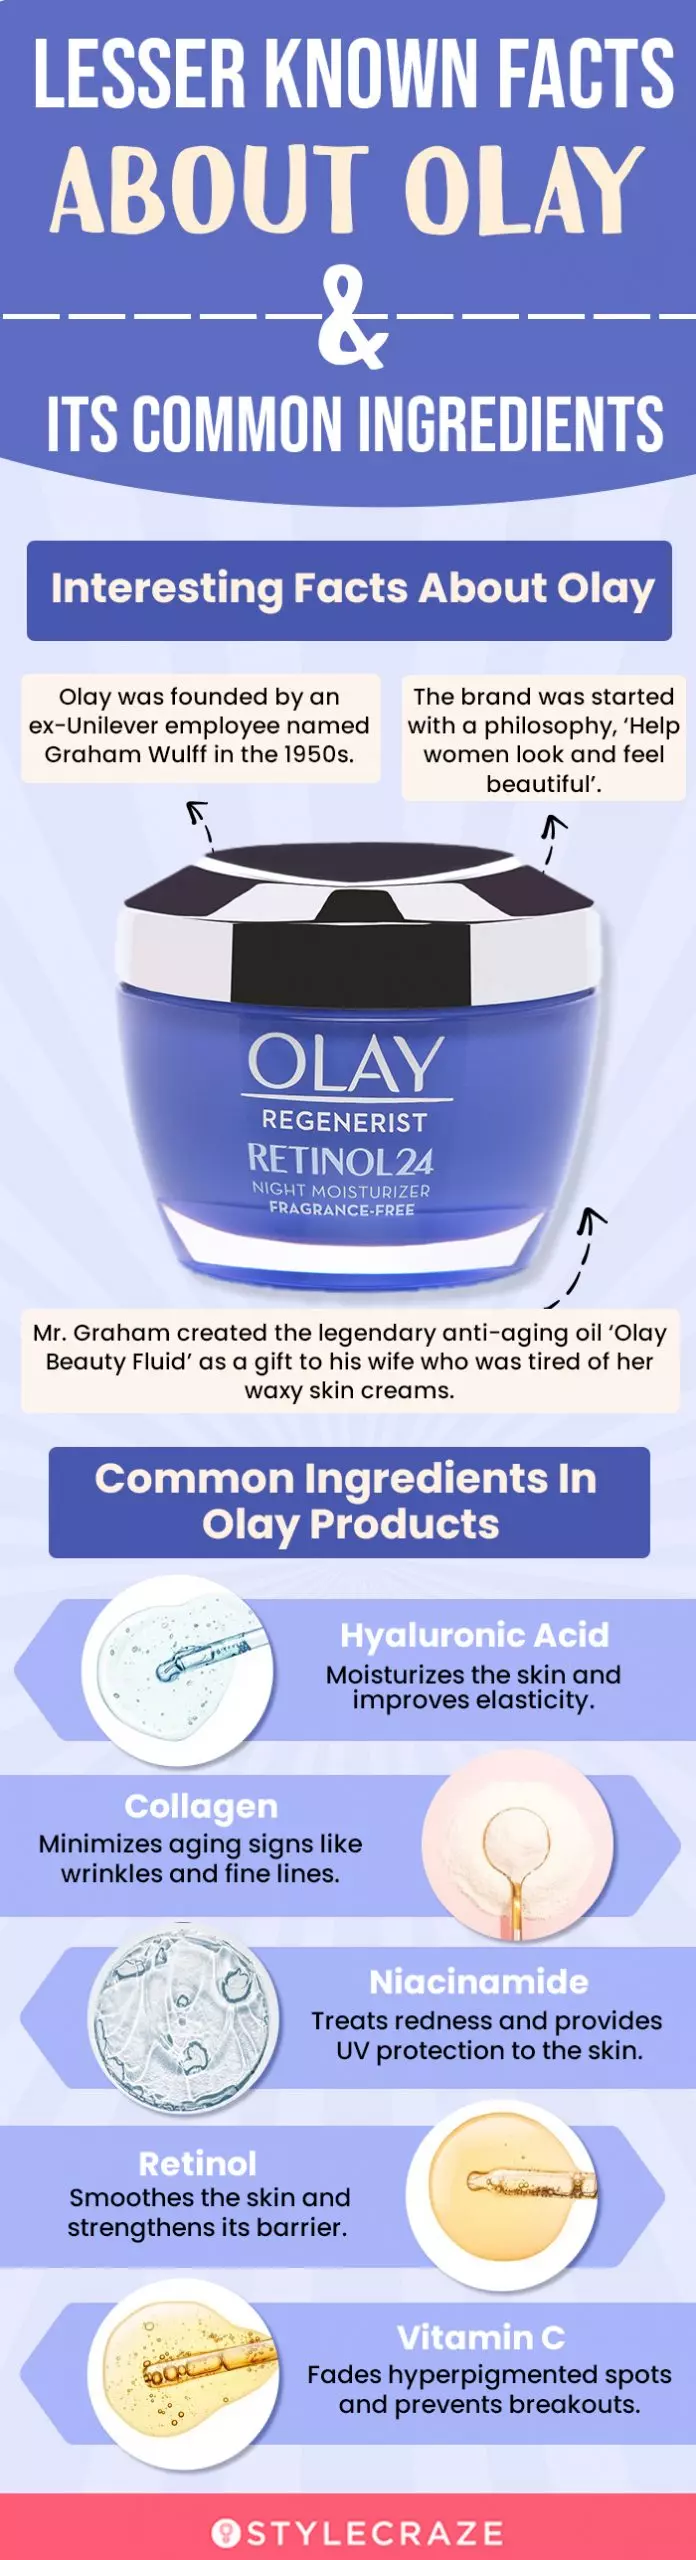 Facts About Olay & Its Common Ingredients (infographic)